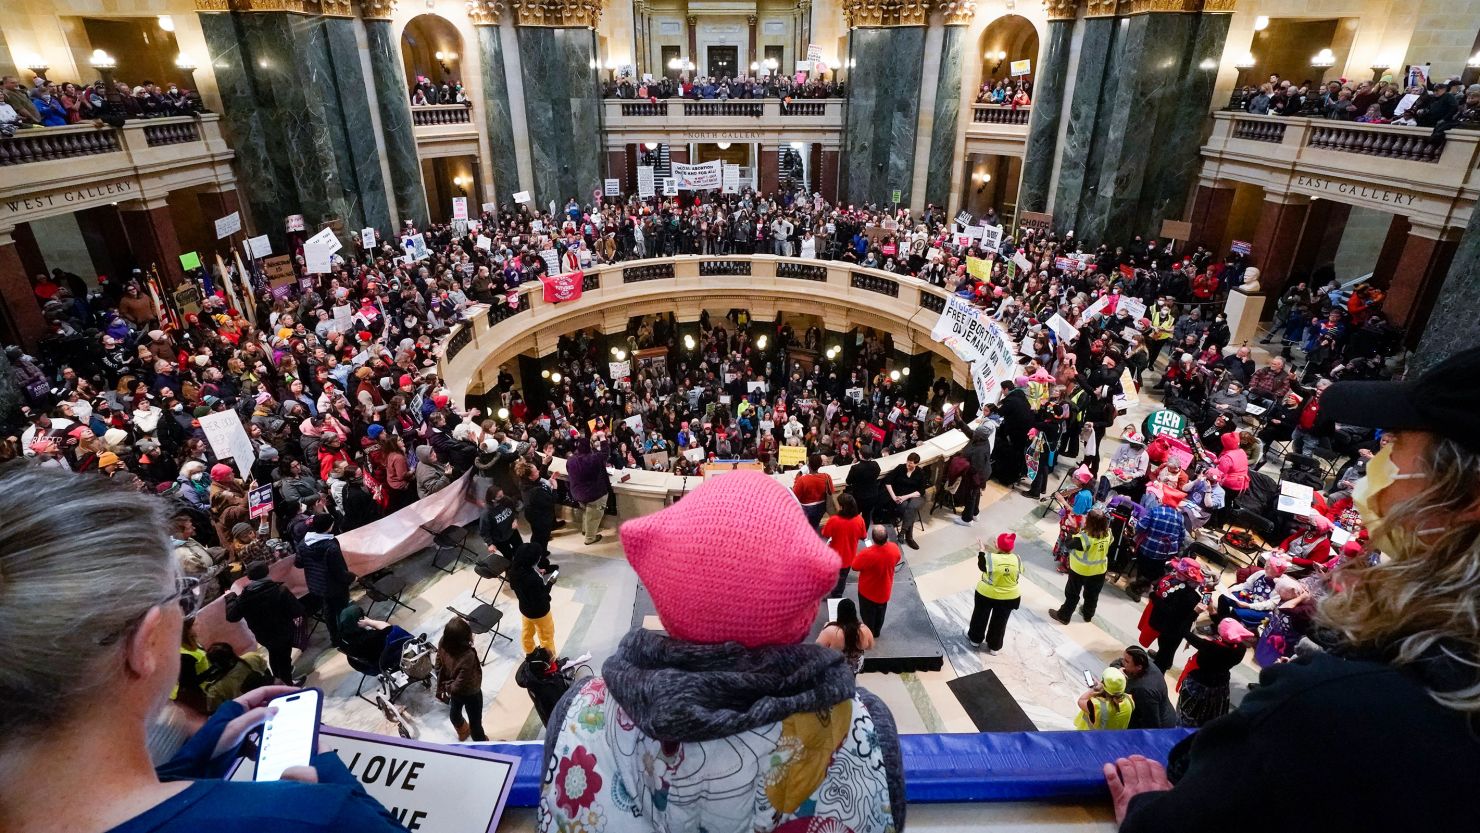 Protesters gather in the Wisconsin Capitol Rotunda during a march supporting overturning Wisconsin's abortion ban on January 22, 2023, in Madison, Wisconsin.